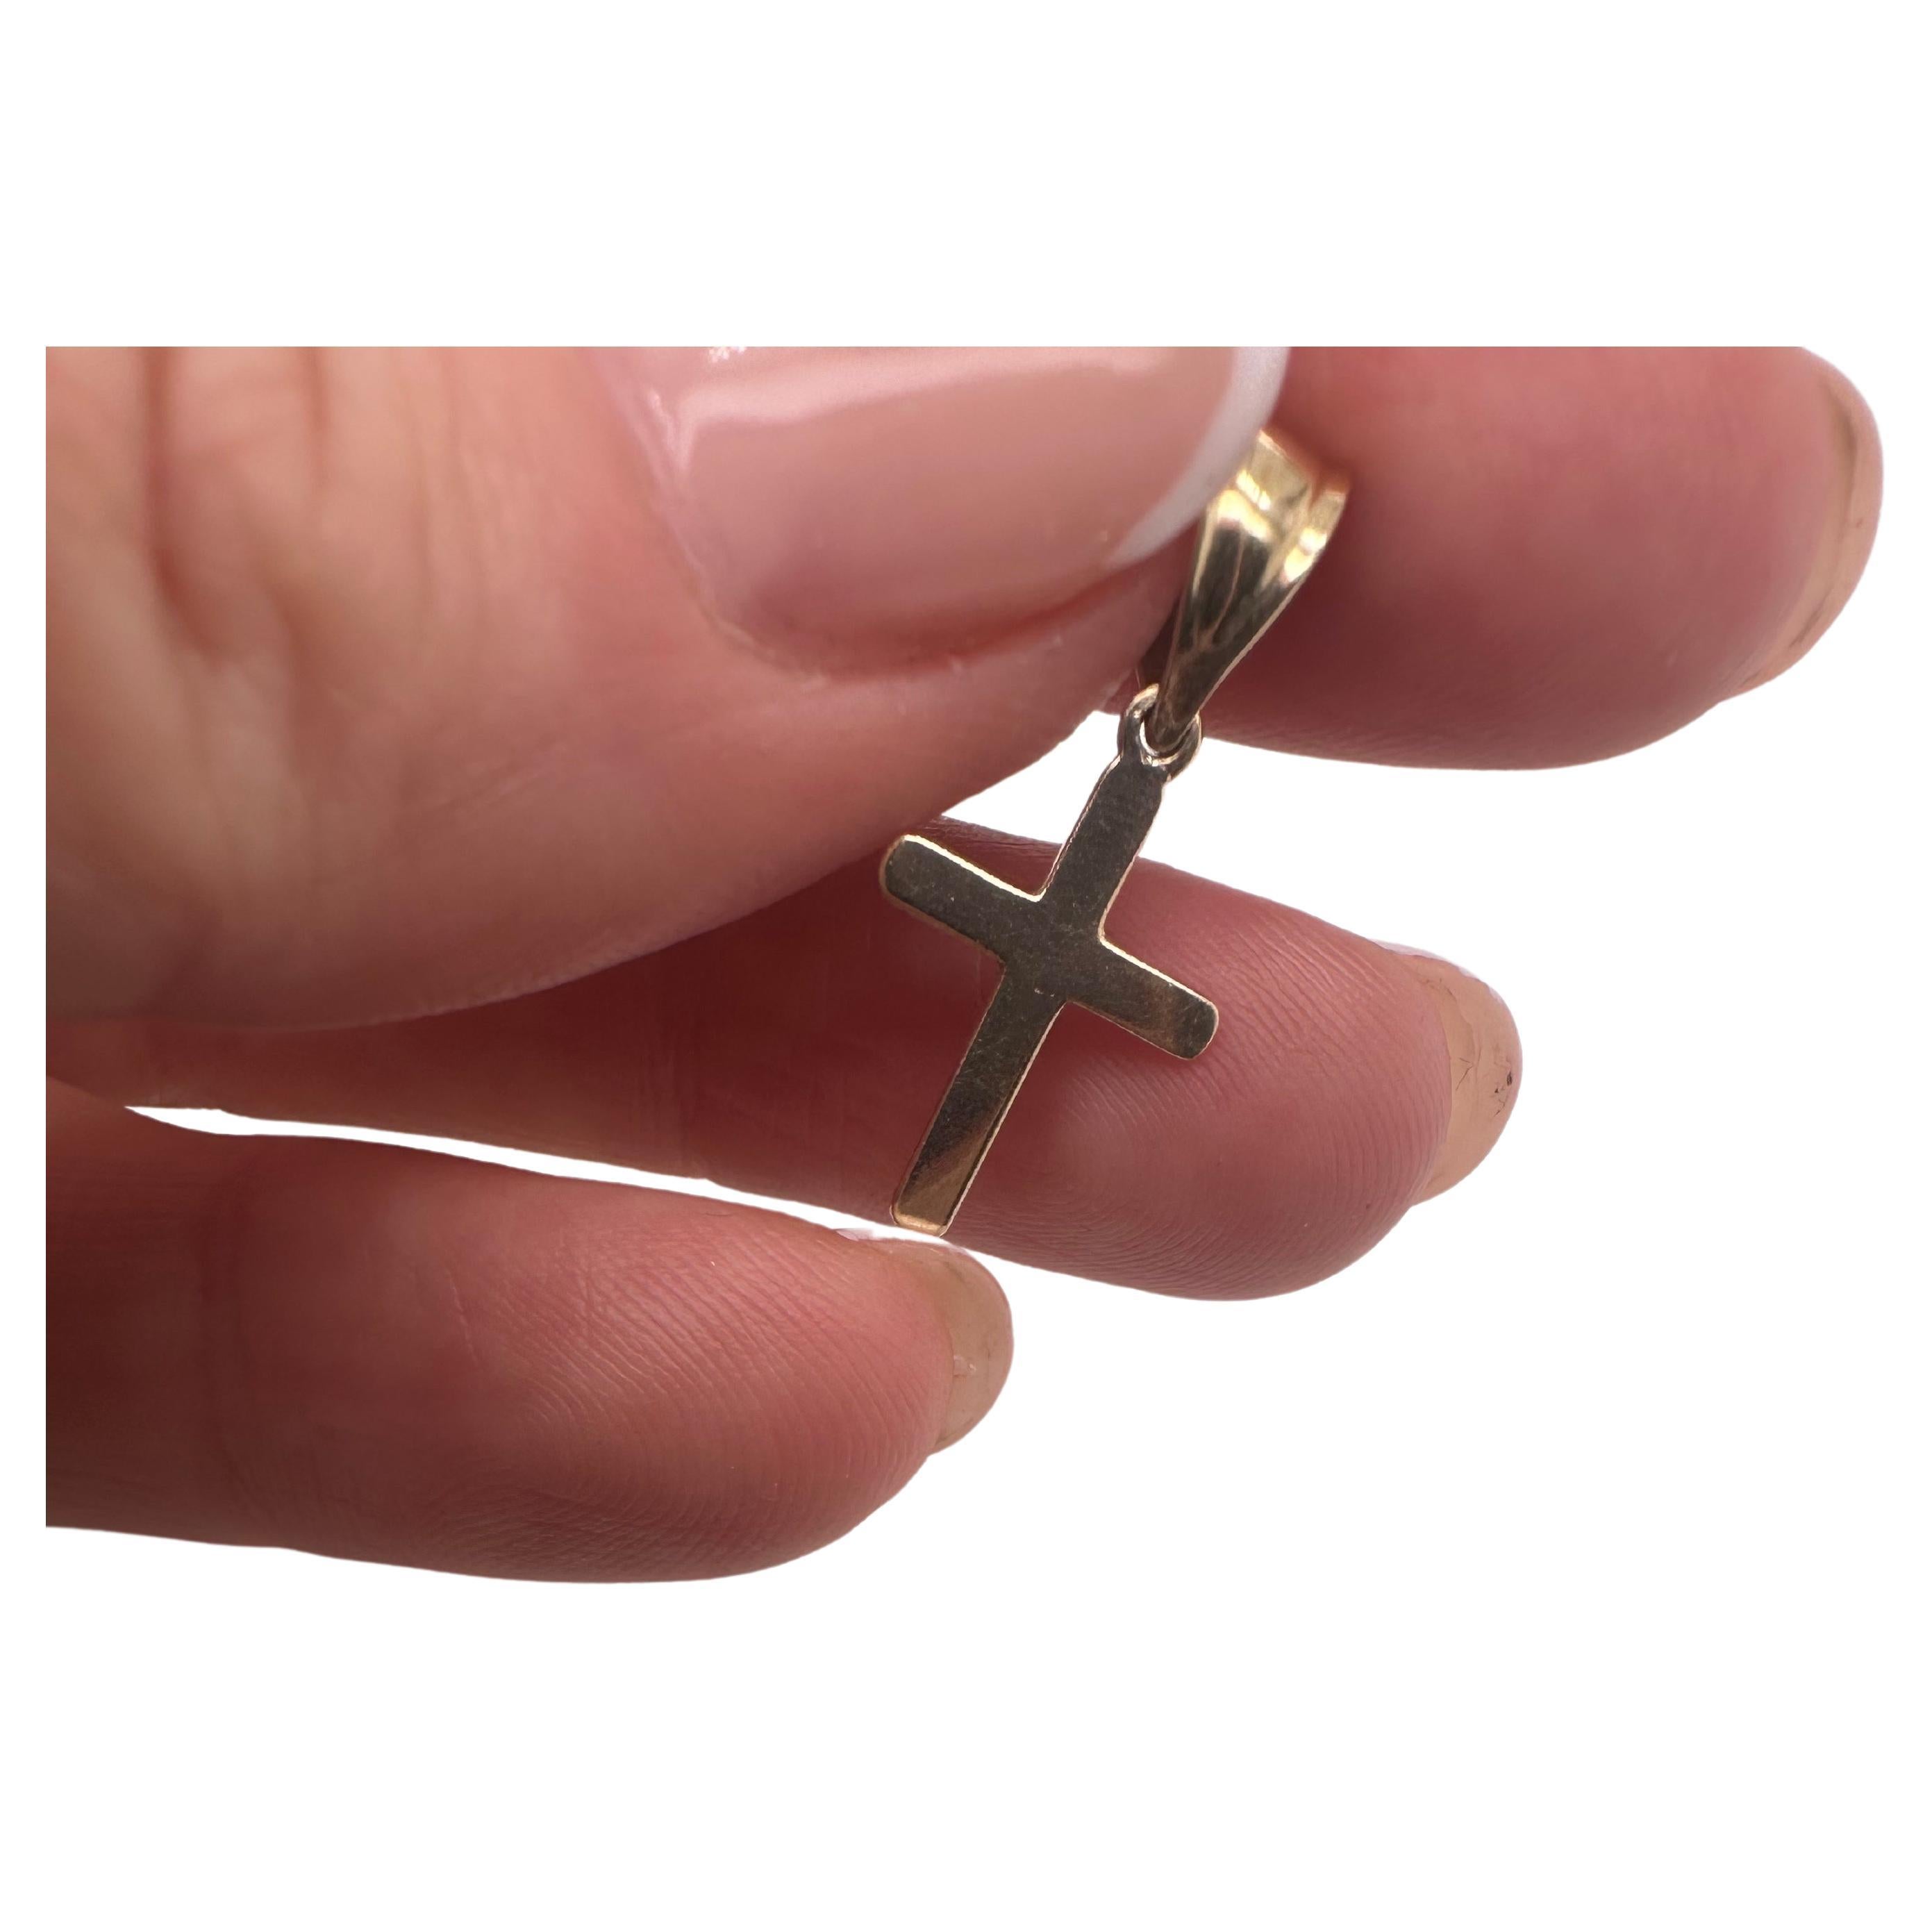 Small cross with a large bail, this is meant for a mens gold chain that wants to wear a cross but not too huge so the bail can fit most chains and it will create a humble look on the gold chain with a small cross on the chain. The cross is simple